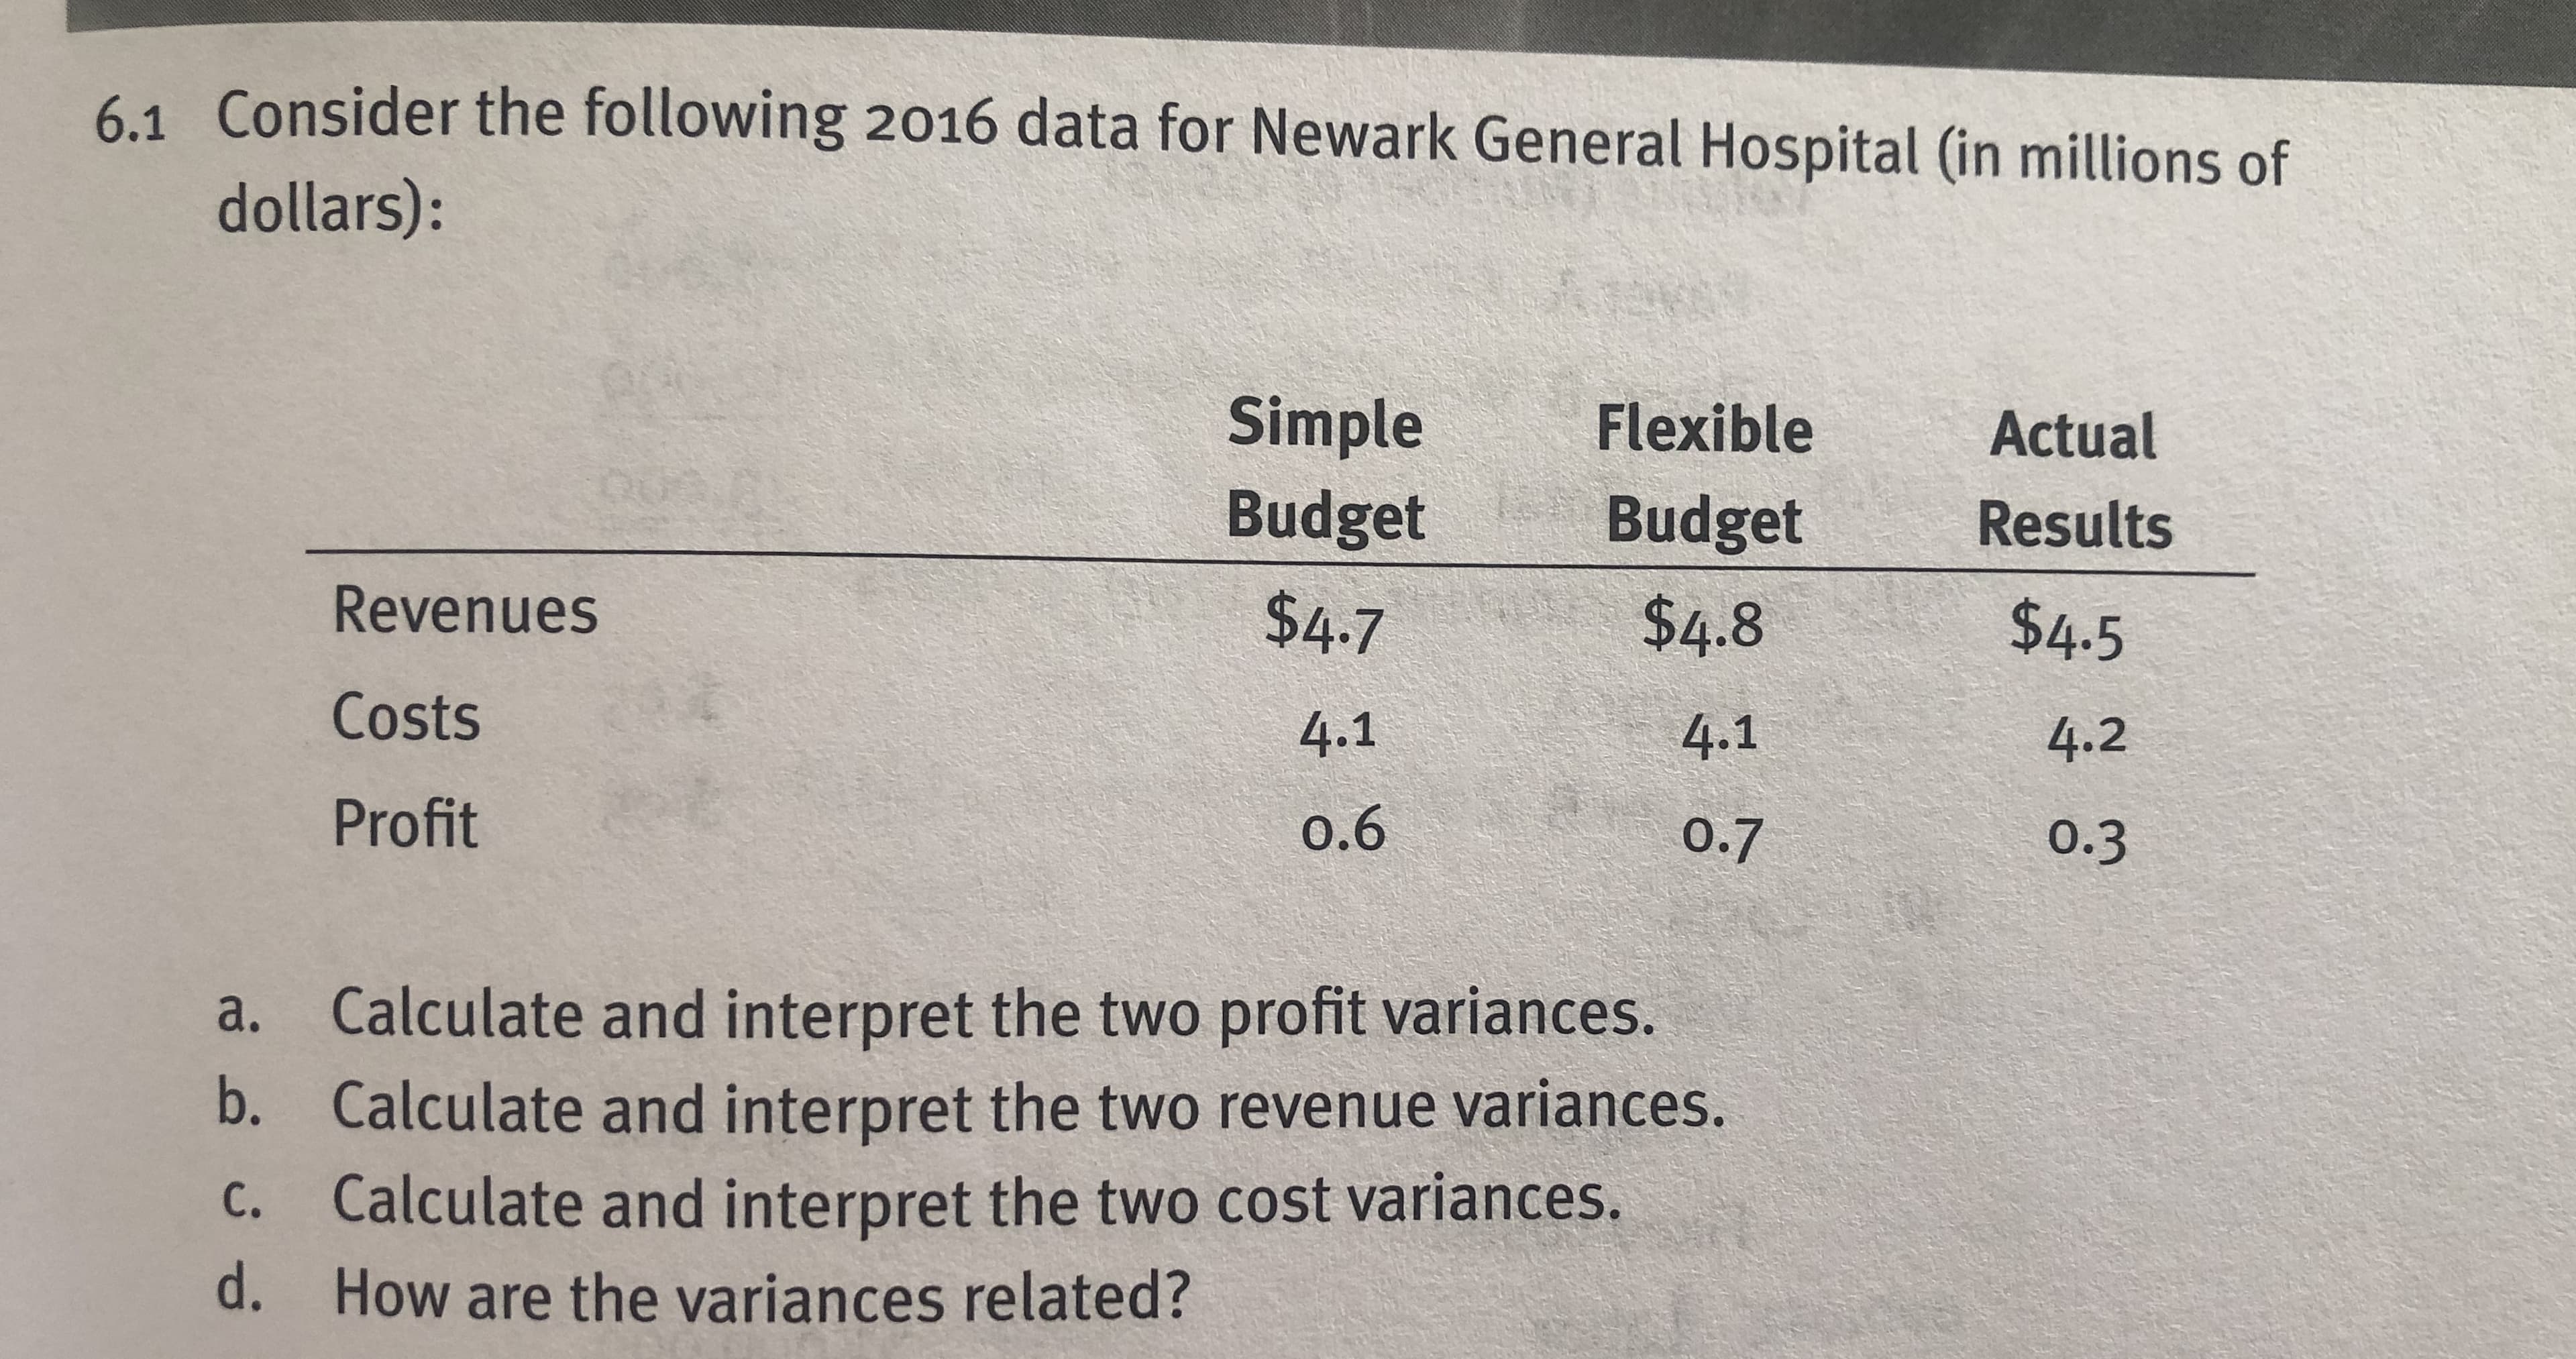 Consider the following 2016 data for Newark General Hospital (in millions of
dollars):
6.1
Simple Flexible
BudgetBudget
Revenues
Costs
Profit
$4.7
4.1
o.6
$4.8
4.1
0.7
Actual
Results
$4.5
4.2
0.3
a.
b.
c.
d.
Calculate and interpret the two profit variances.
Calculate and interpret the two revenue variances.
Calculate and interpret the two cost variances.
How are the variances related?
